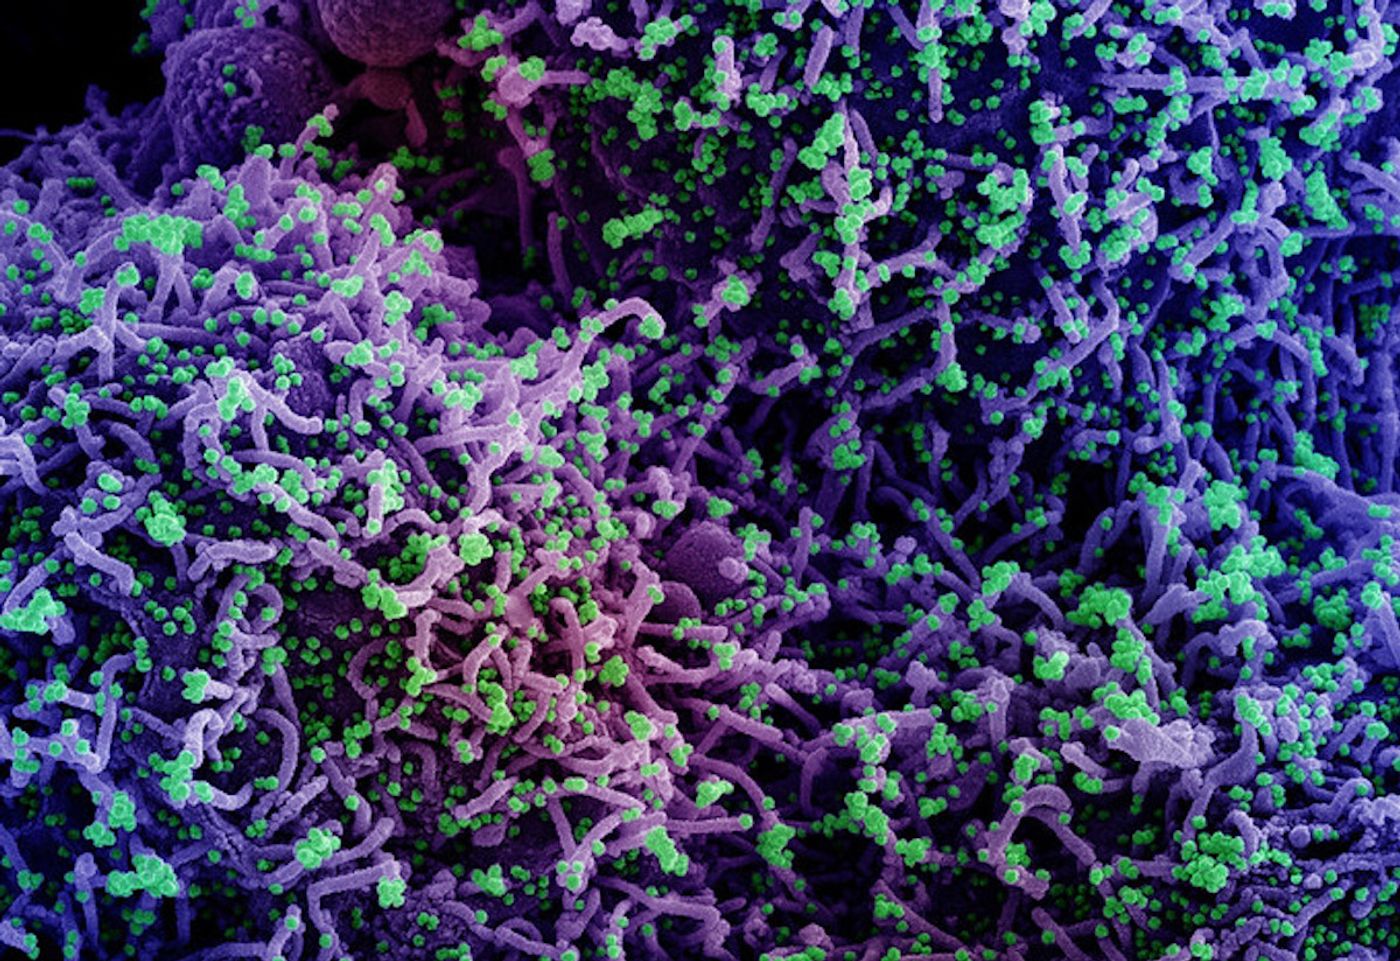 Scanning electron micrograph of a cell (purple) infected with a variant strain of SARS-CoV-2 virus particles (green), isolated from a patient sample and colorized in Halloween colors. Image captured at the NIAID Integrated Research Facility (IRF) in Fort Detrick, Maryland. / Credit: NIAID